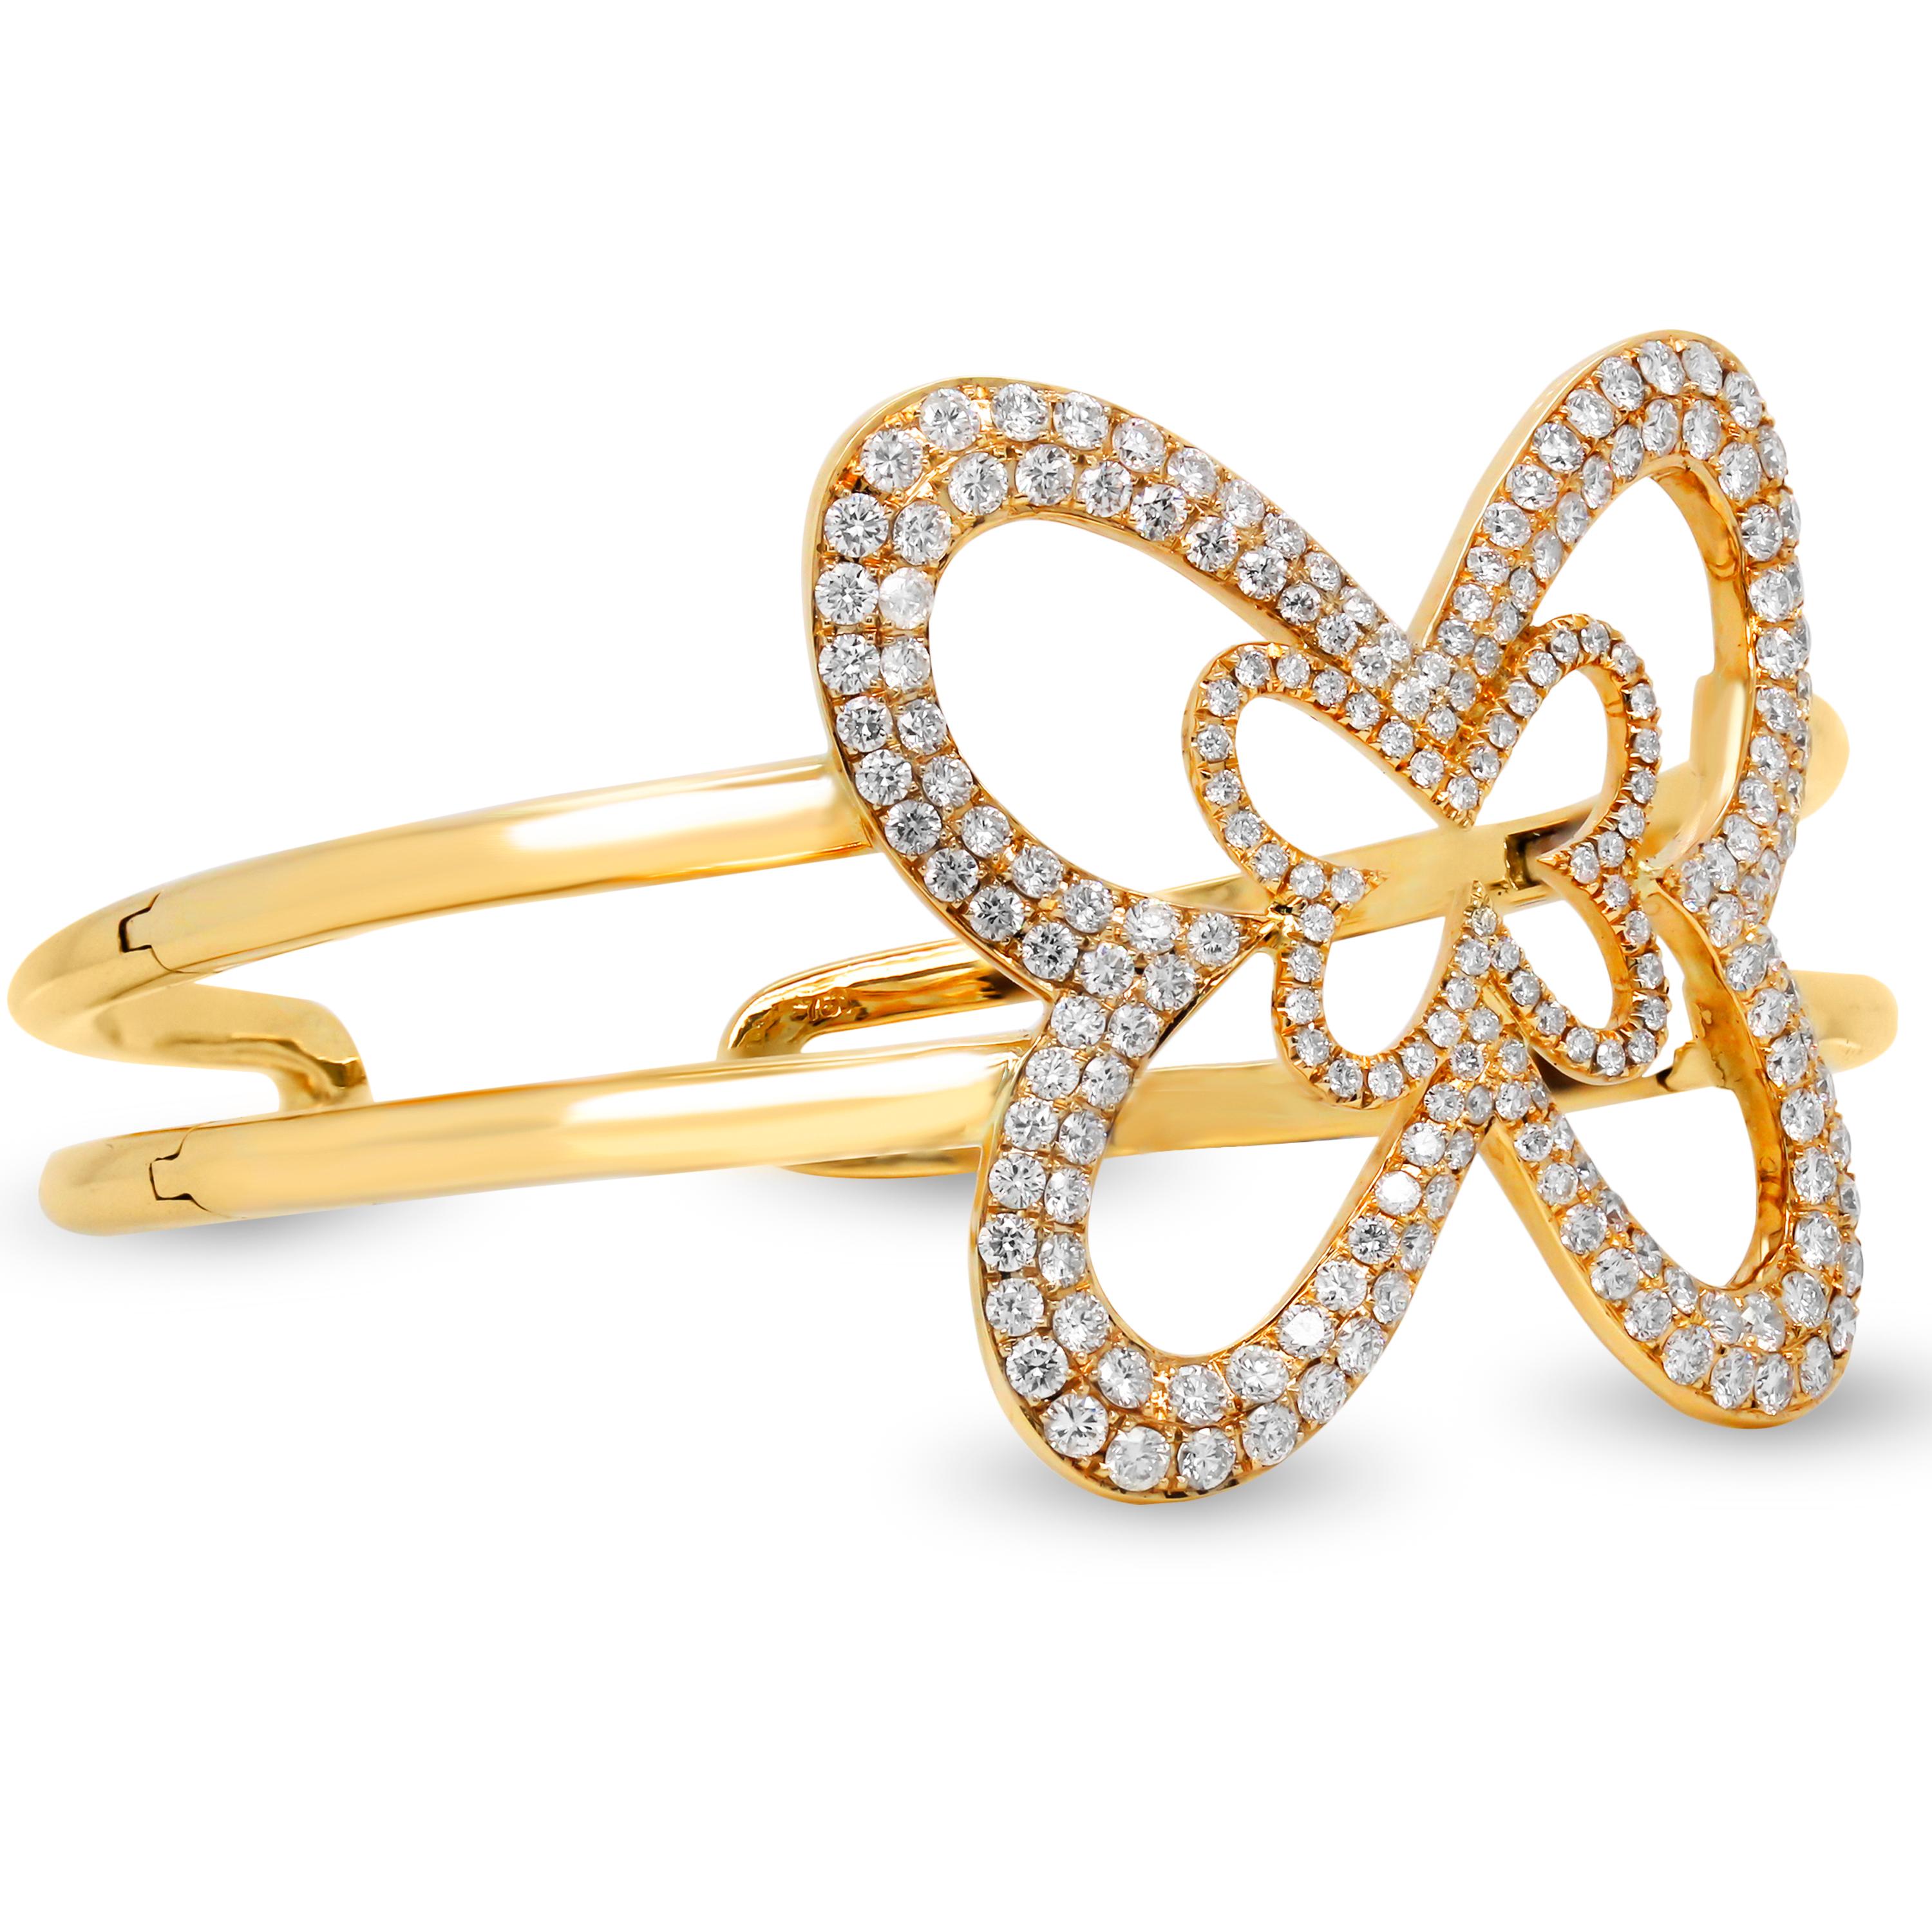 18K Yellow Gold Diamond Large Butterfly Bangle Bracelet

This fun bracelet features a large butterfly with a smaller butterfly in the center.

3.30 carat G color, VS clarity diamonds total weight

Butterfly is 1.35 inch from top to bottom. 0.47 inch